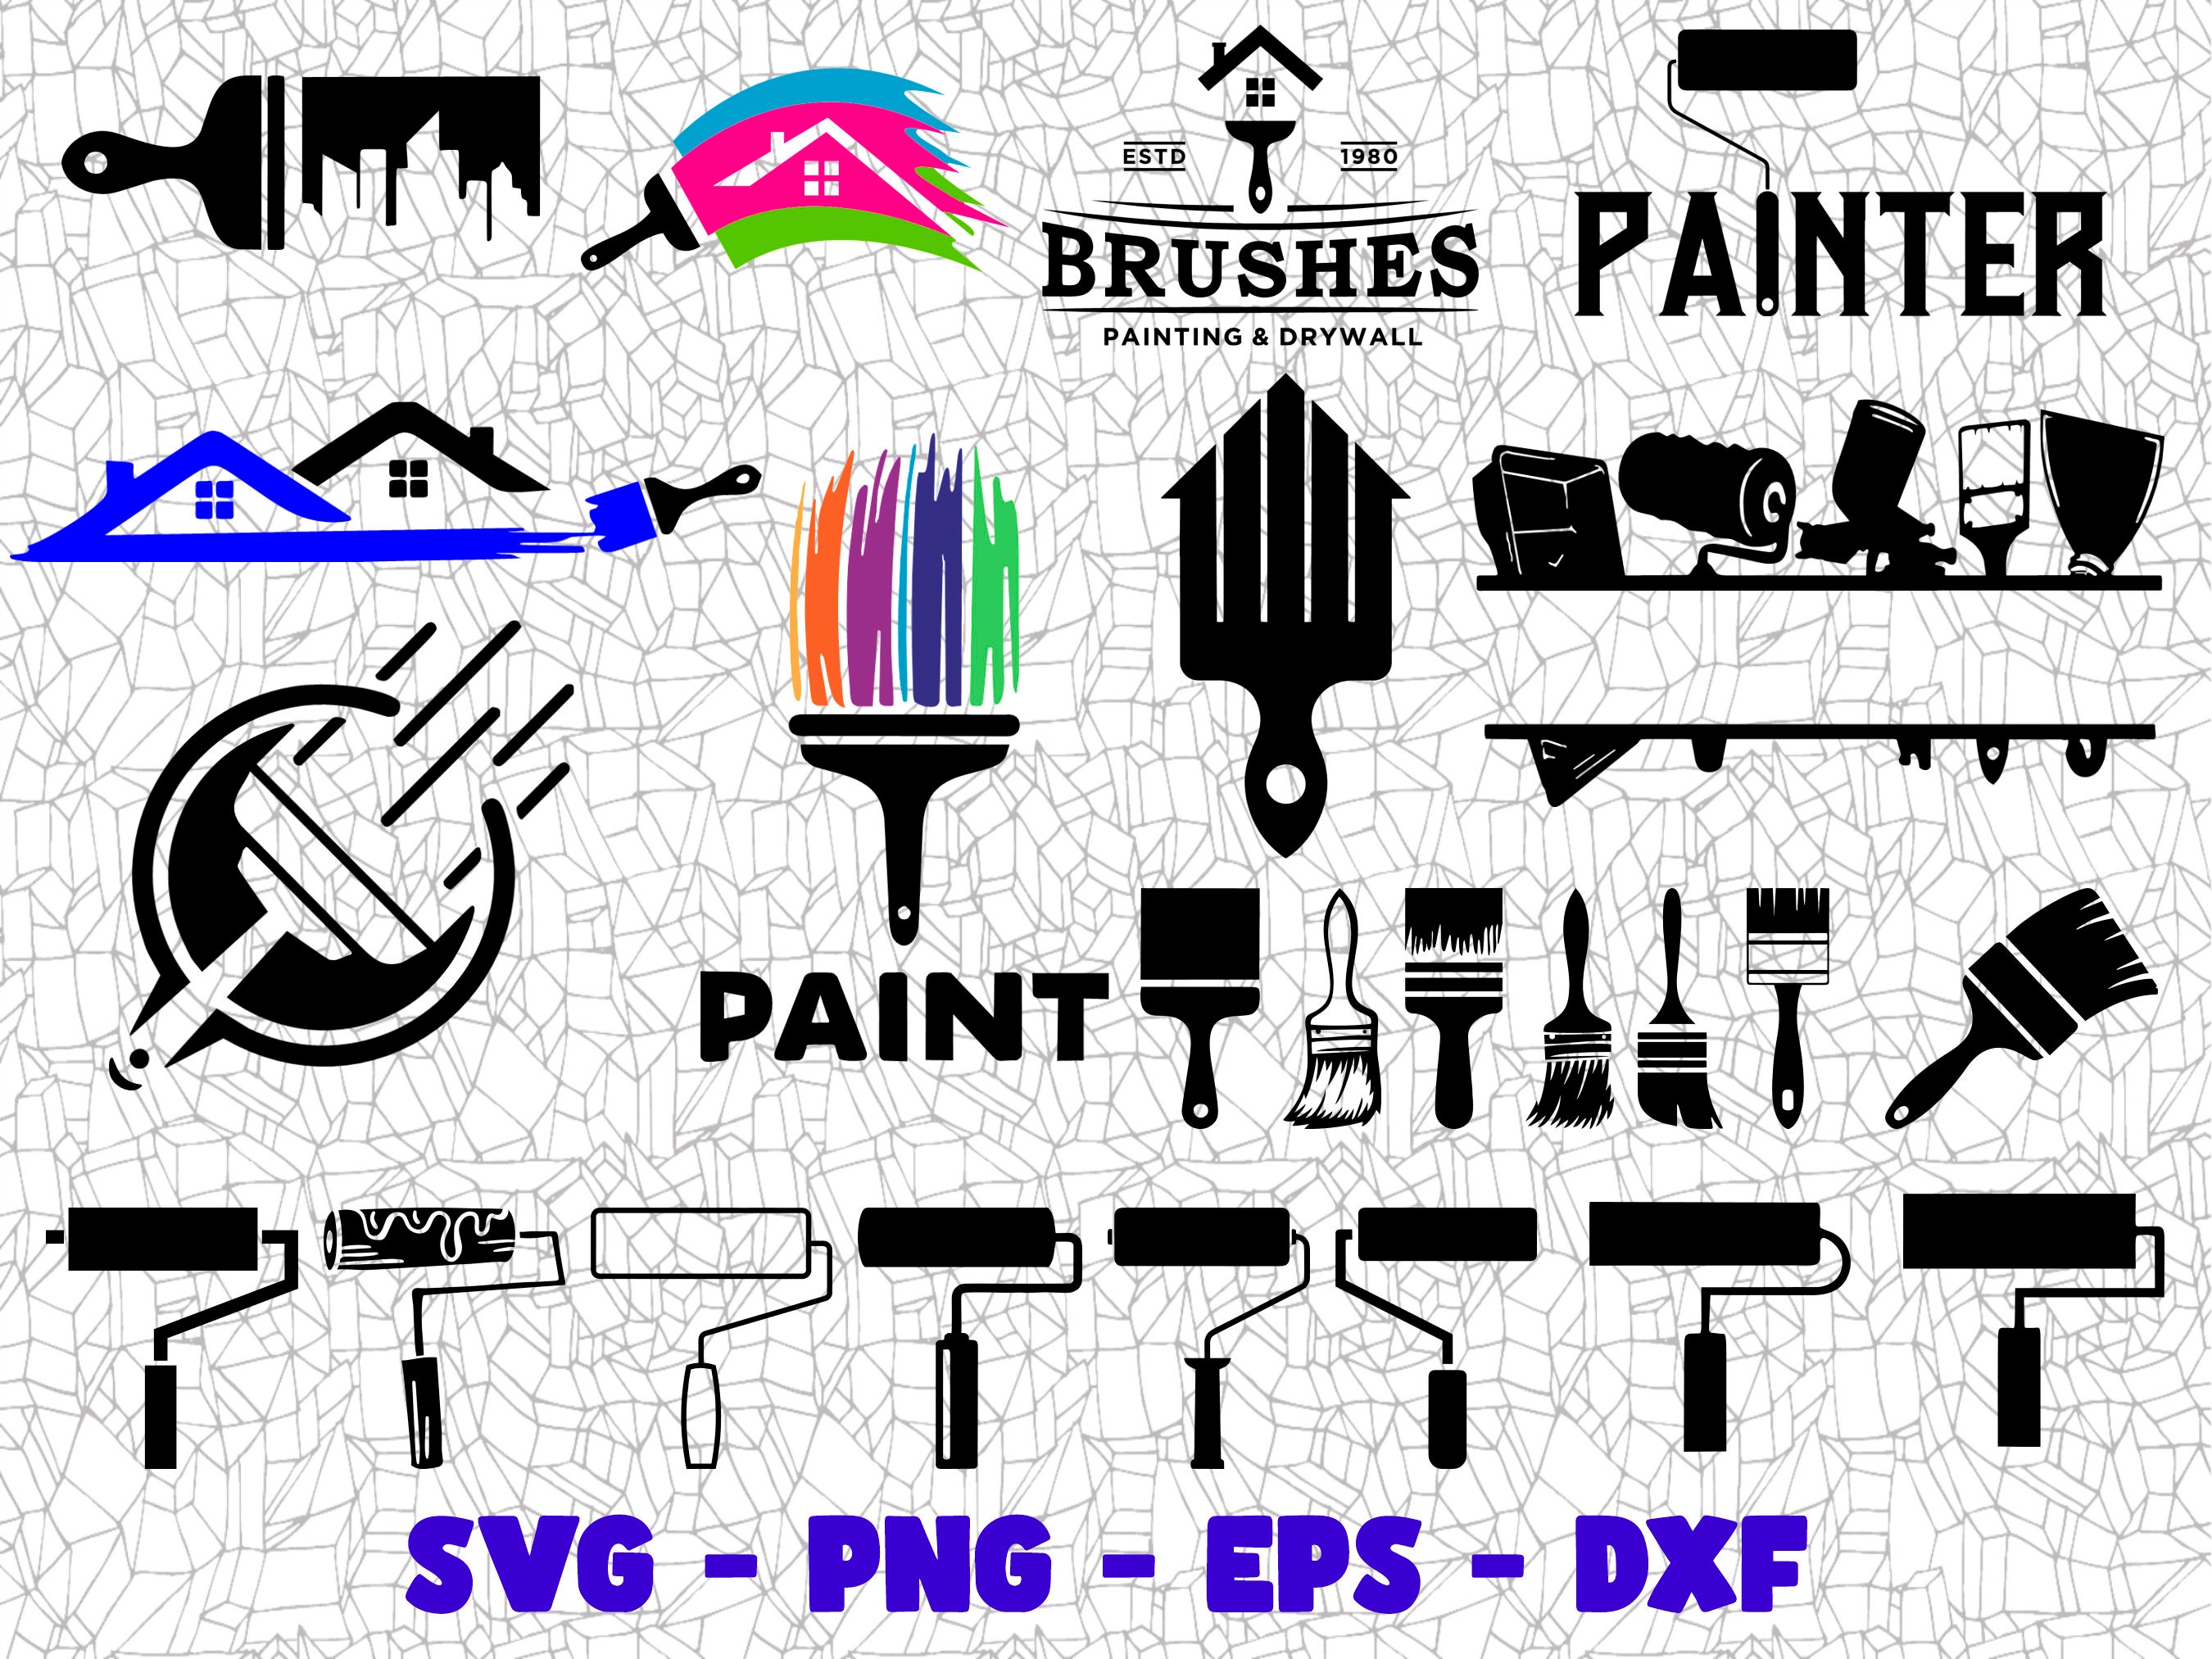 Paint Pallet SVG / DXF / EPS / PNG Files By Digital Gems